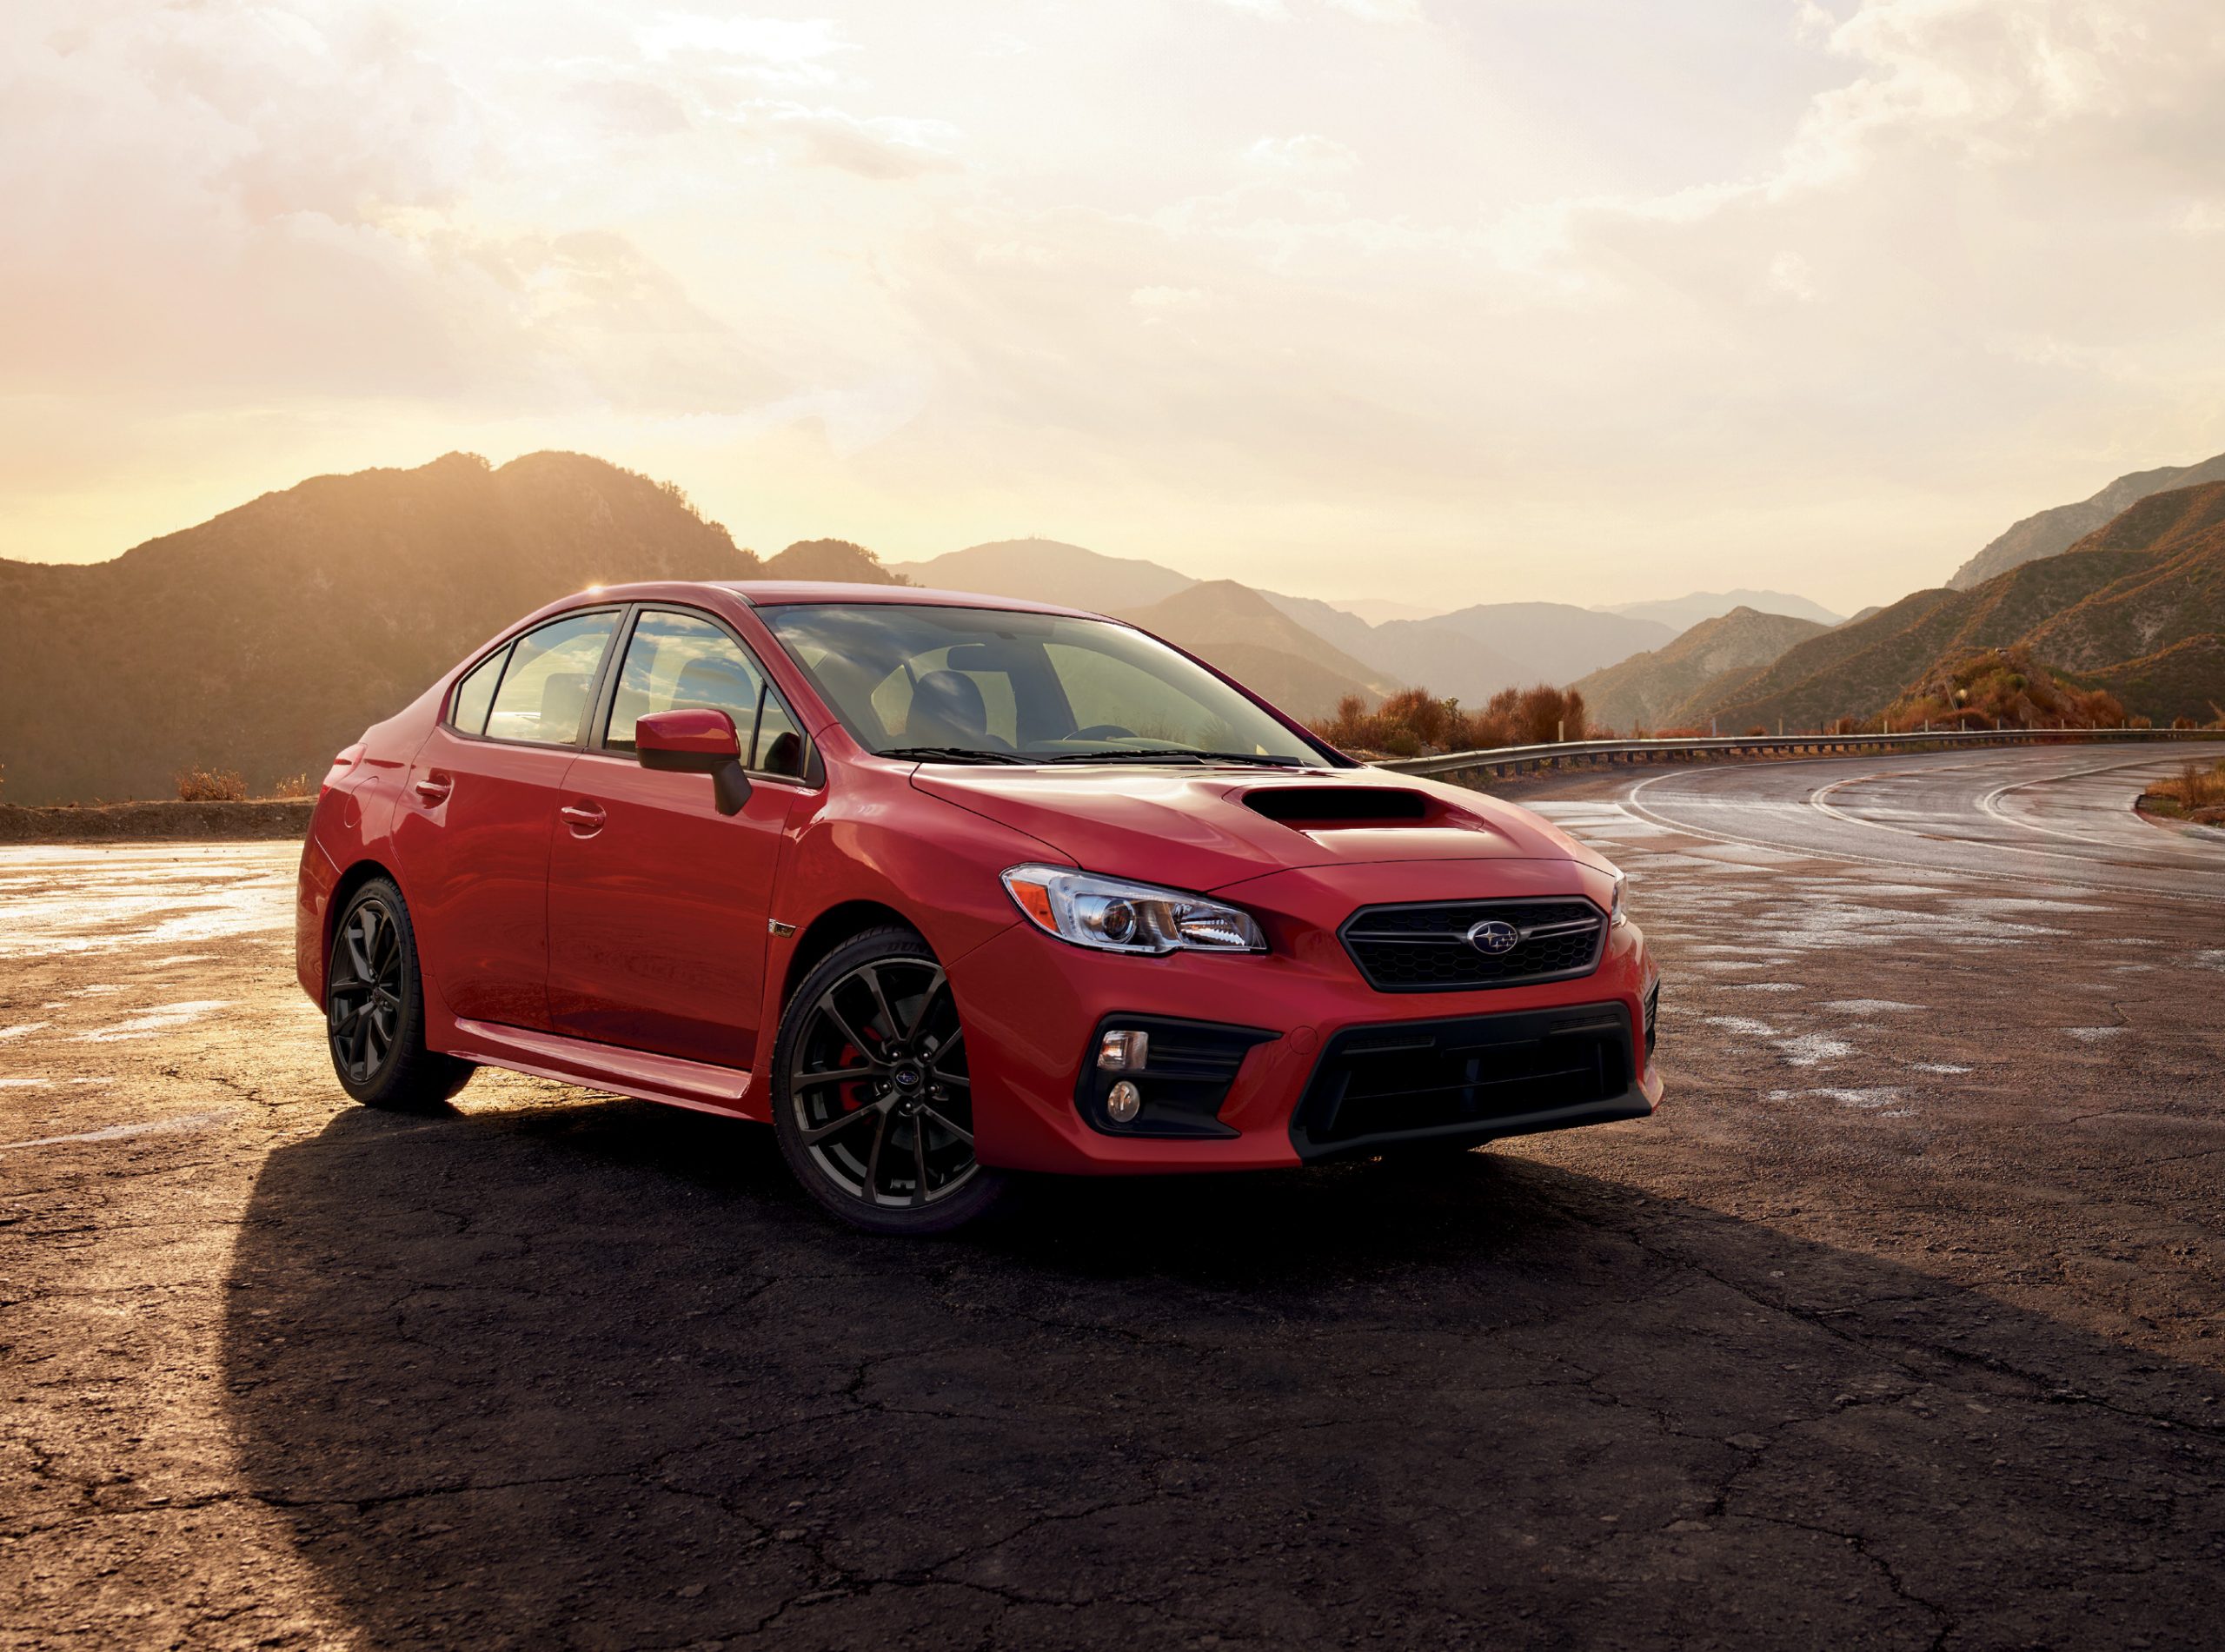 A red Subaru WRX shot at sunset. The WRX makes for an excellent cheap used car.